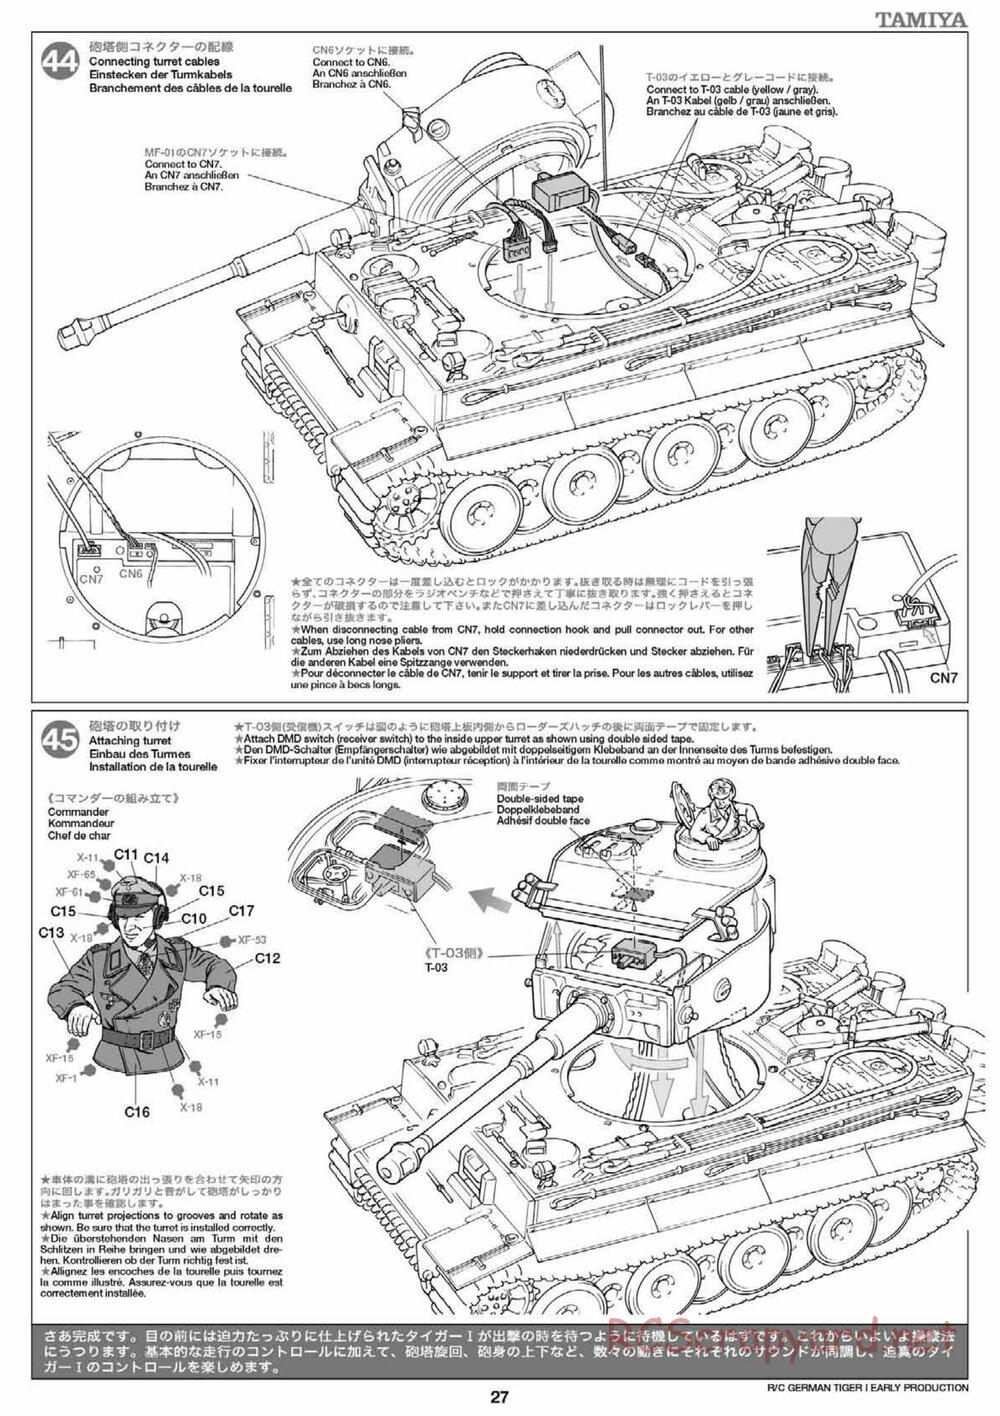 Tamiya - Tiger I Early Production - 1/16 Scale Chassis - Manual - Page 27